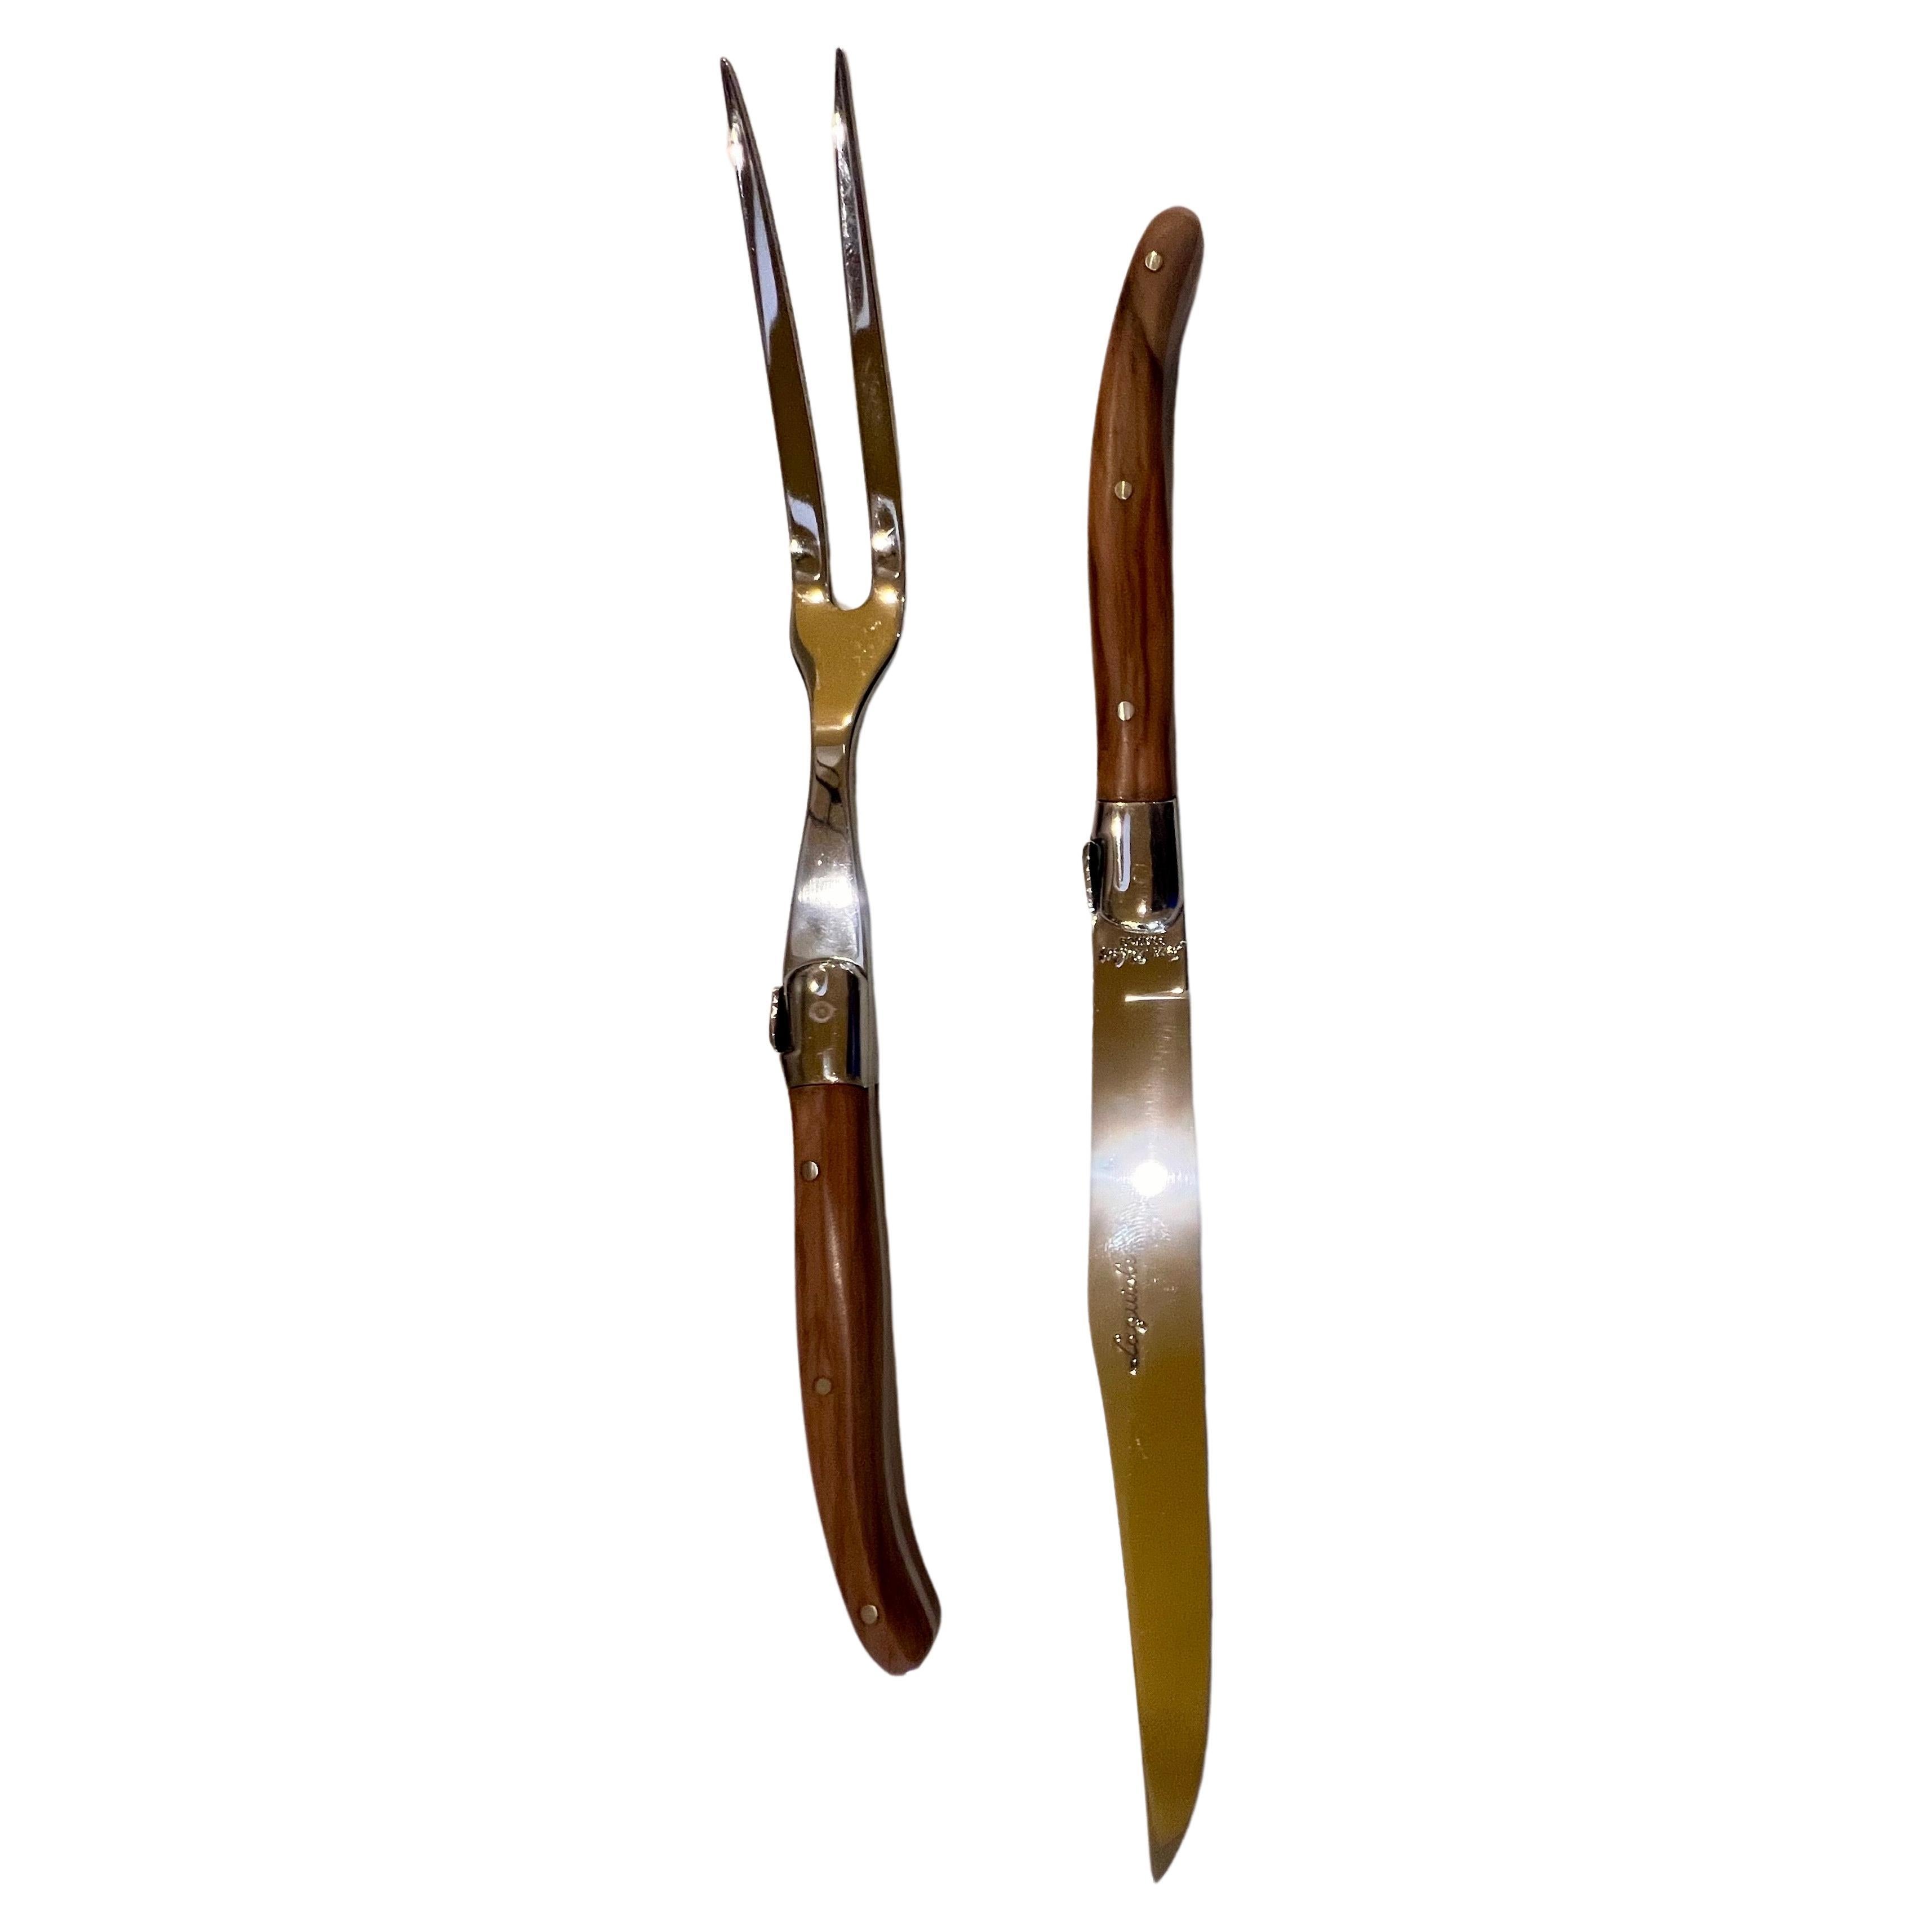 2-PIECE CARVING SET. Set includes one carving knife and one carving fork with walnut handle. Carving knife blade dimensions: 7-in; entire knife: 12-in Fork dimensions: 12.5-in
SUPERB QUALITY. Blade is fully forged from ultra strong Sandvik steel.